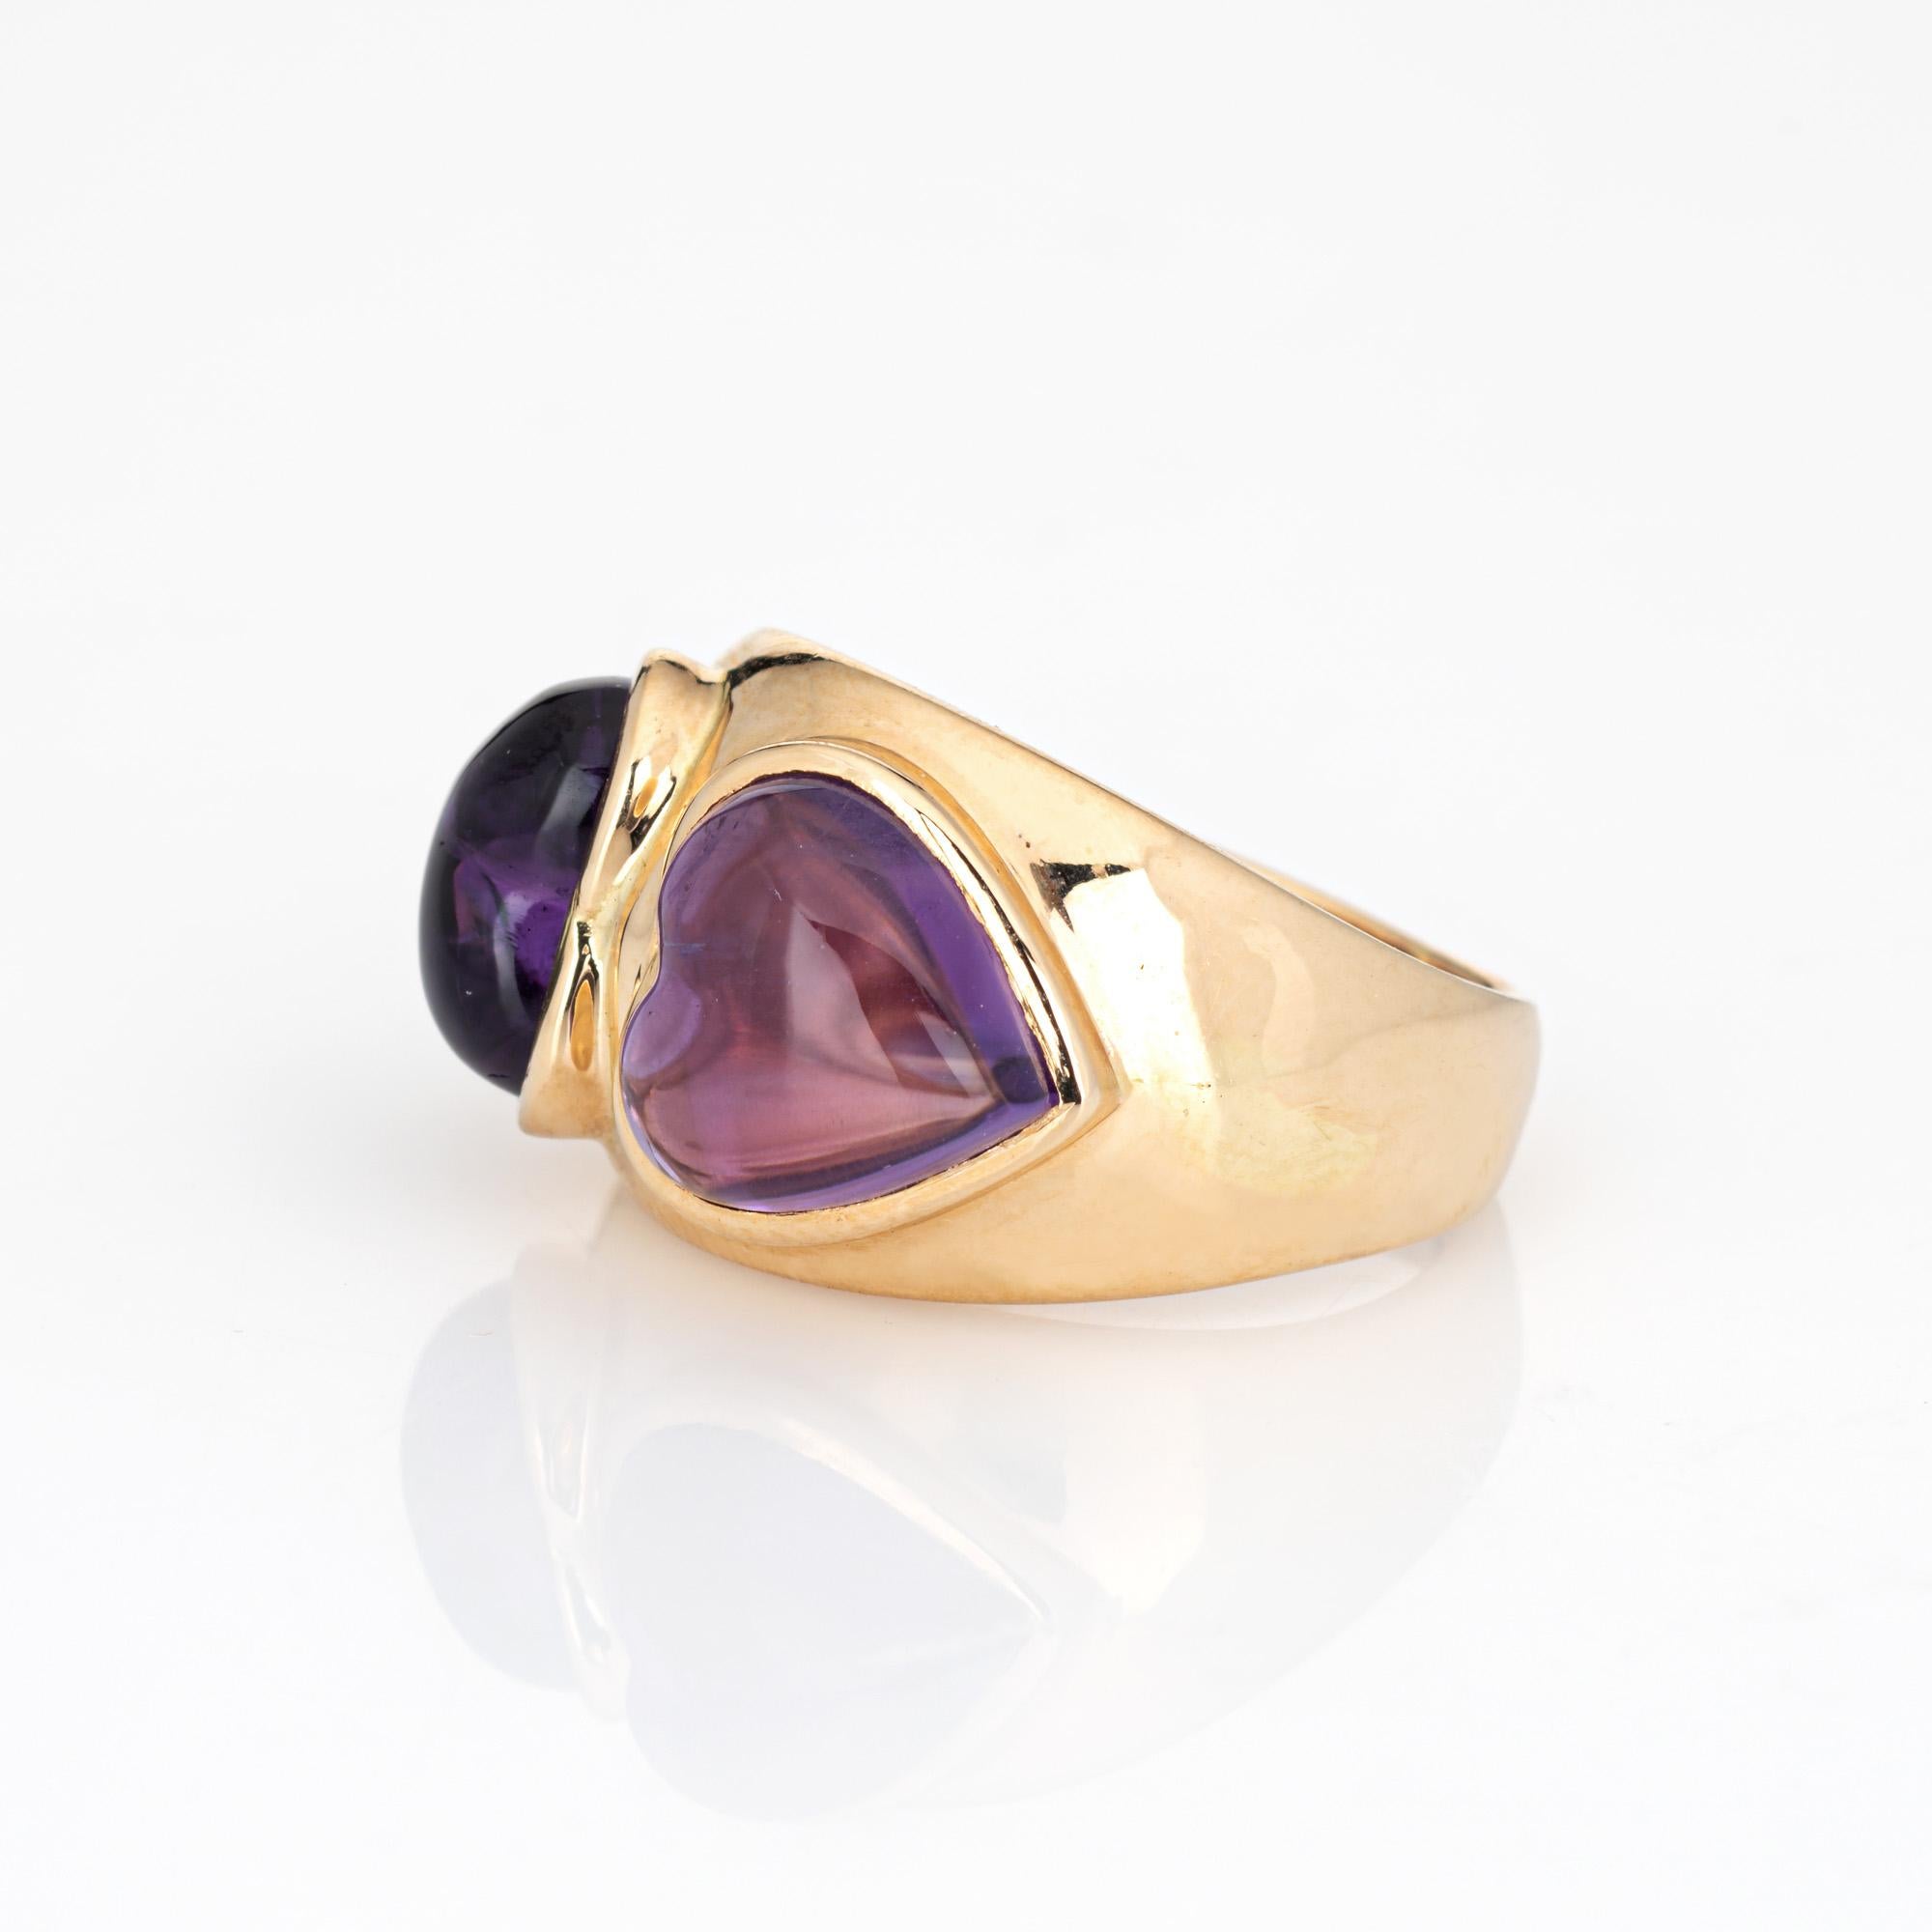 Heart Cut Double Heart Amethyst Ring Vintage 14k Yellow Gold Band Sz 5 Estate Jewelry